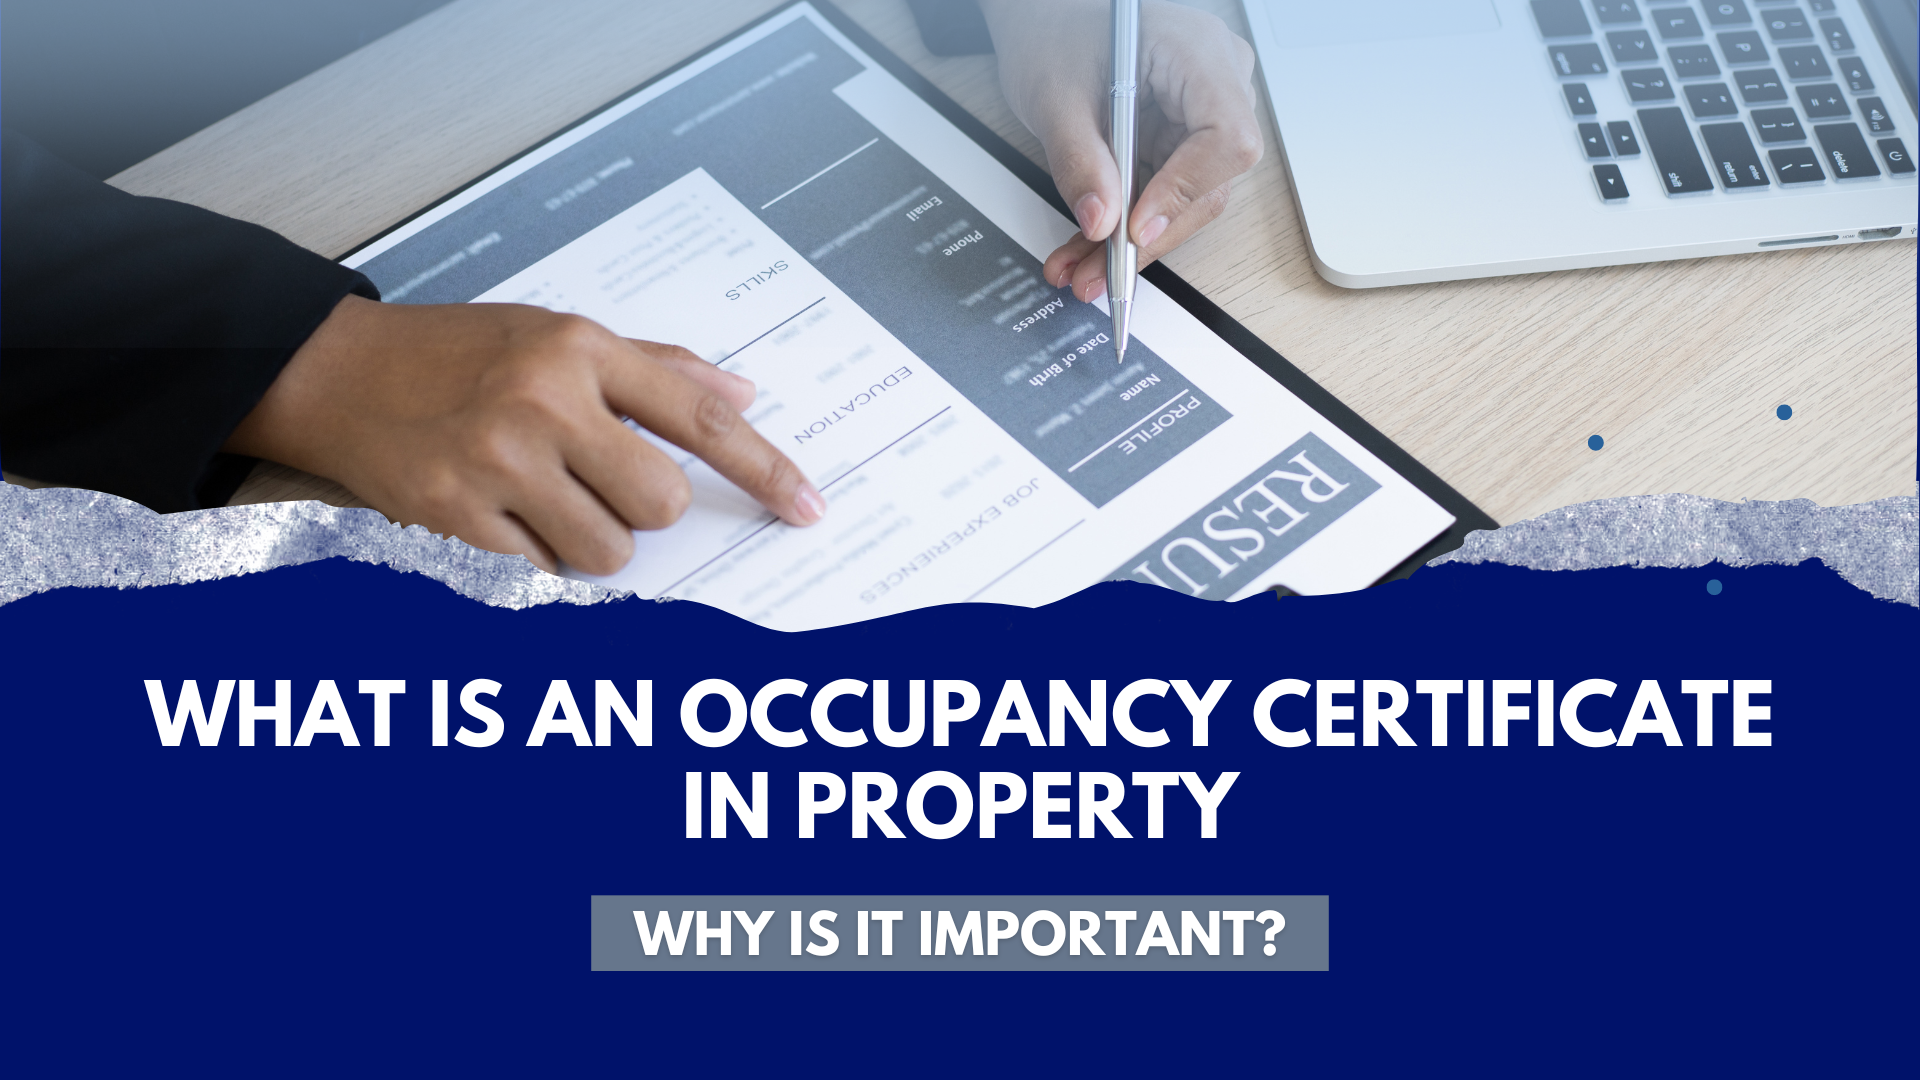 What Is an Occupancy Certificate in Property